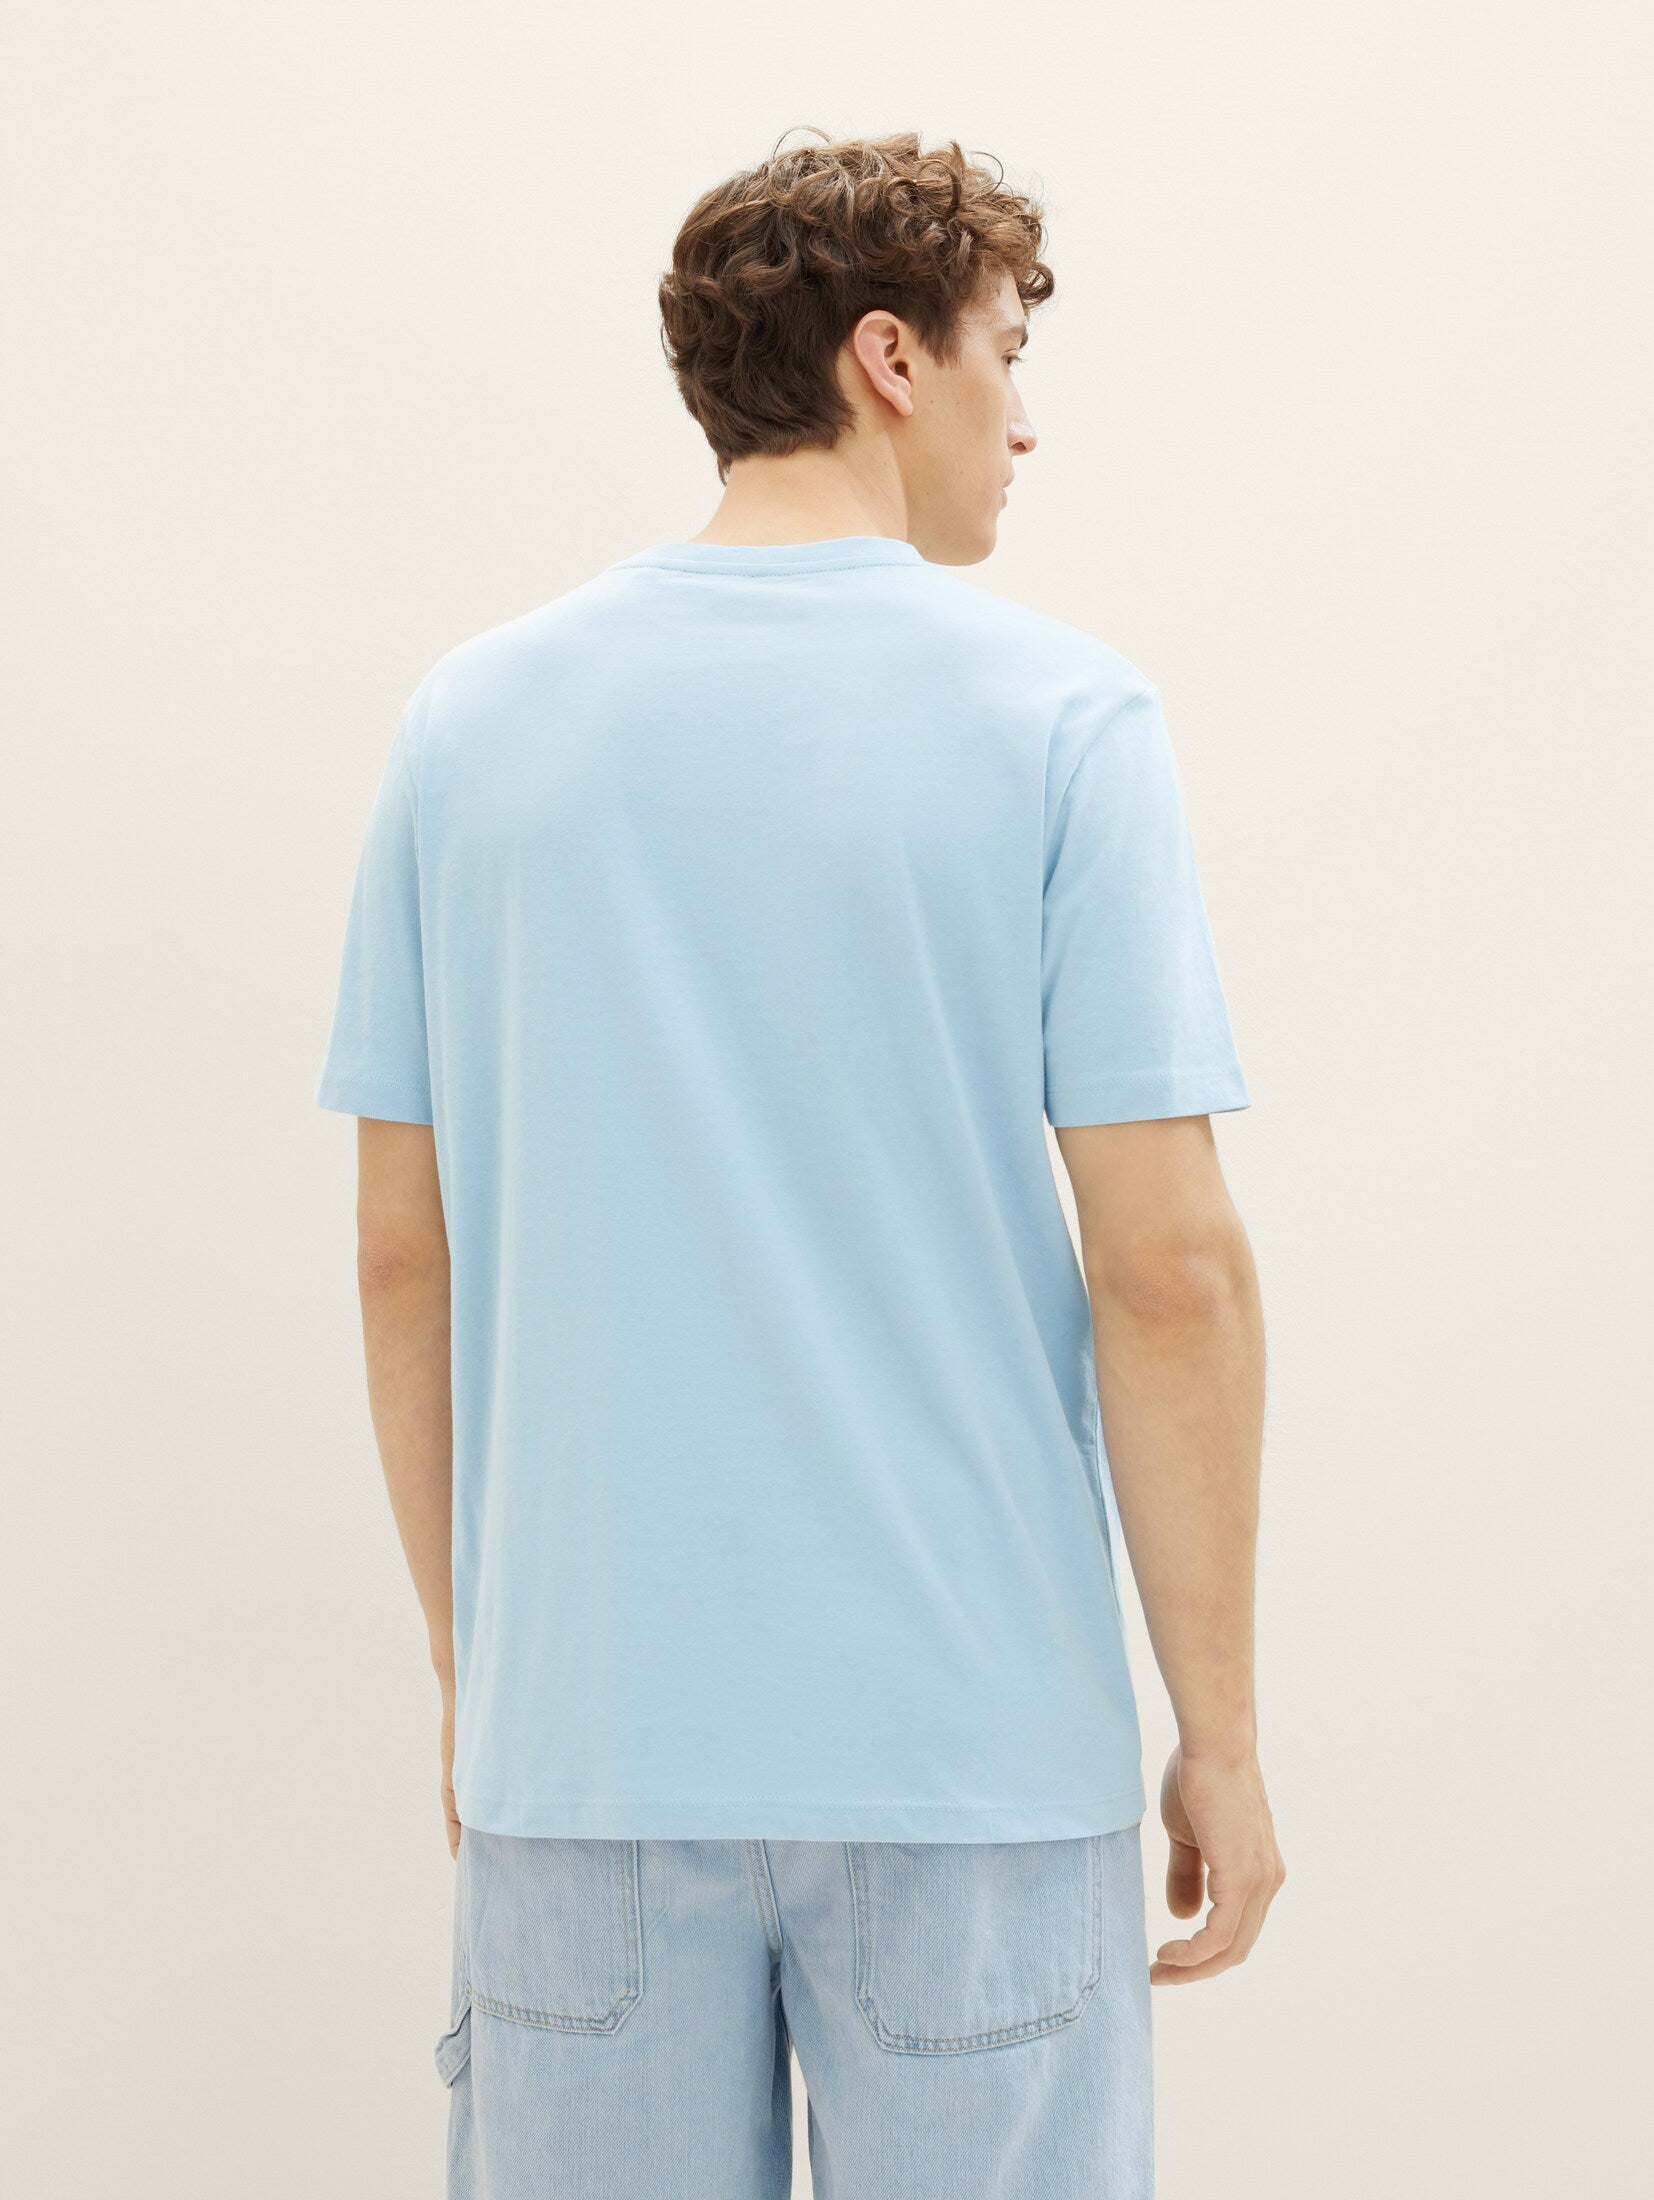 Tom Tailor  Washed Out Middle Blue T-shirt with a Logo Print